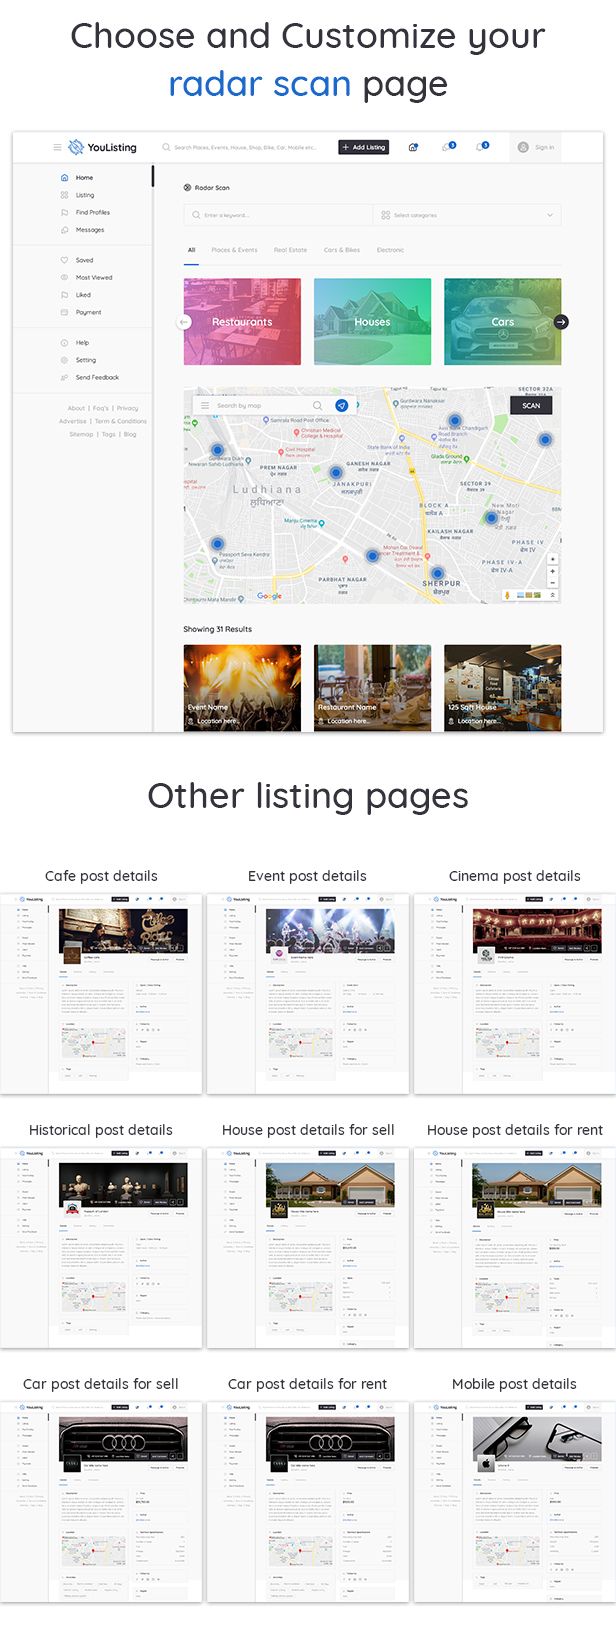 YouListing - Classified Listing and Directory Social Networking PSD Template - 5